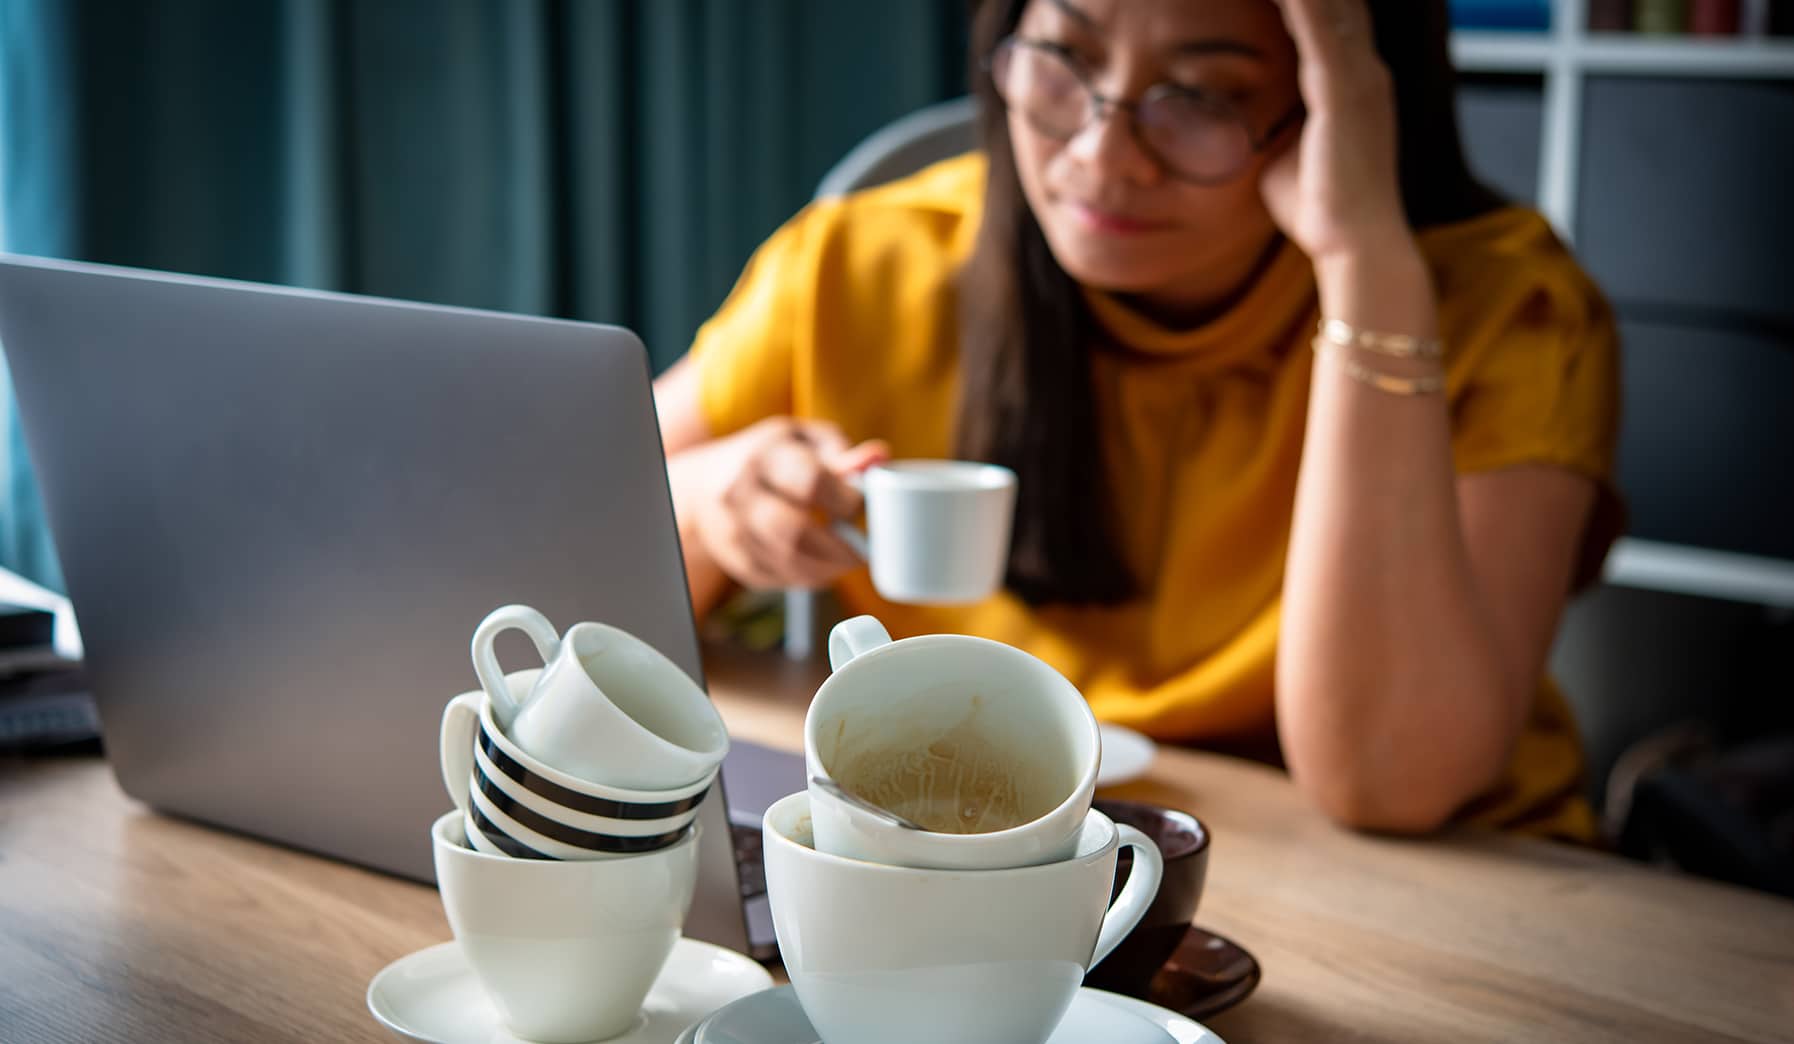 a stack of 5 differently sized coffee and espresso cups sits in the foreground as a distressed woman frowns at her computer screen with a cup of coffee held in her hand